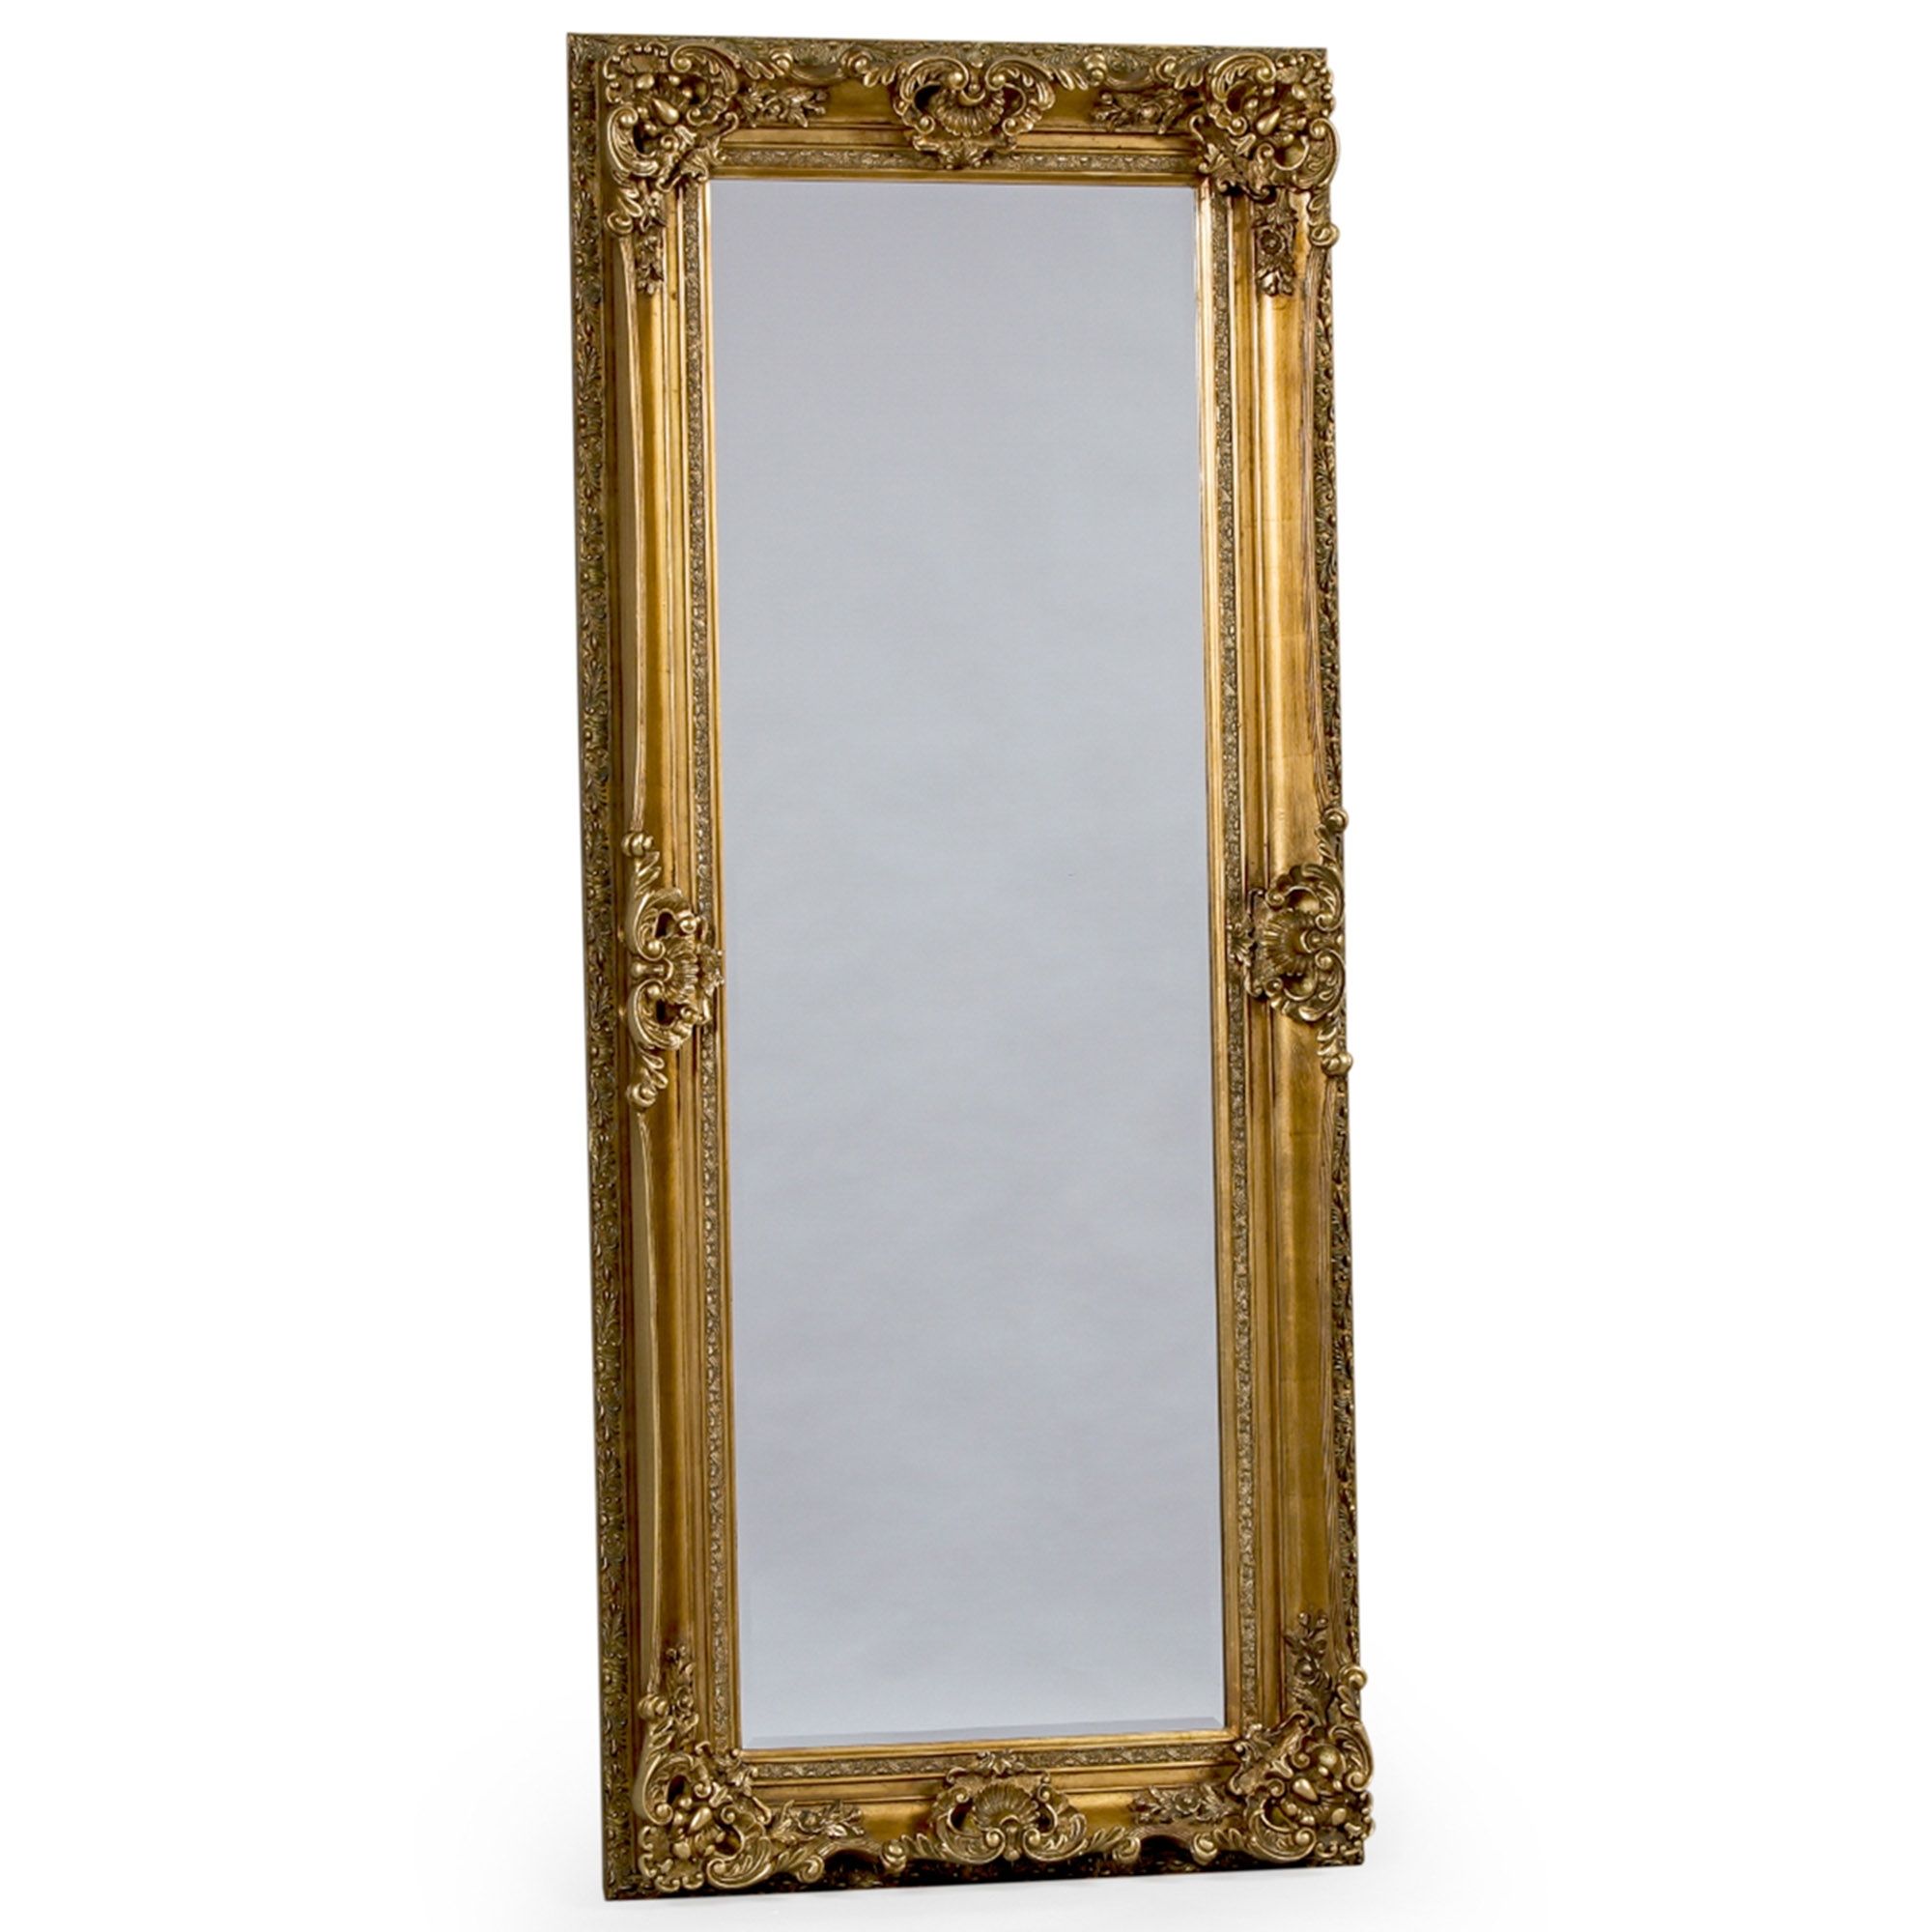 Gold Tall Antique French Style Mirror | French Mirrors Online Pertaining To Antique Gold Scallop Wall Mirrors (View 11 of 15)